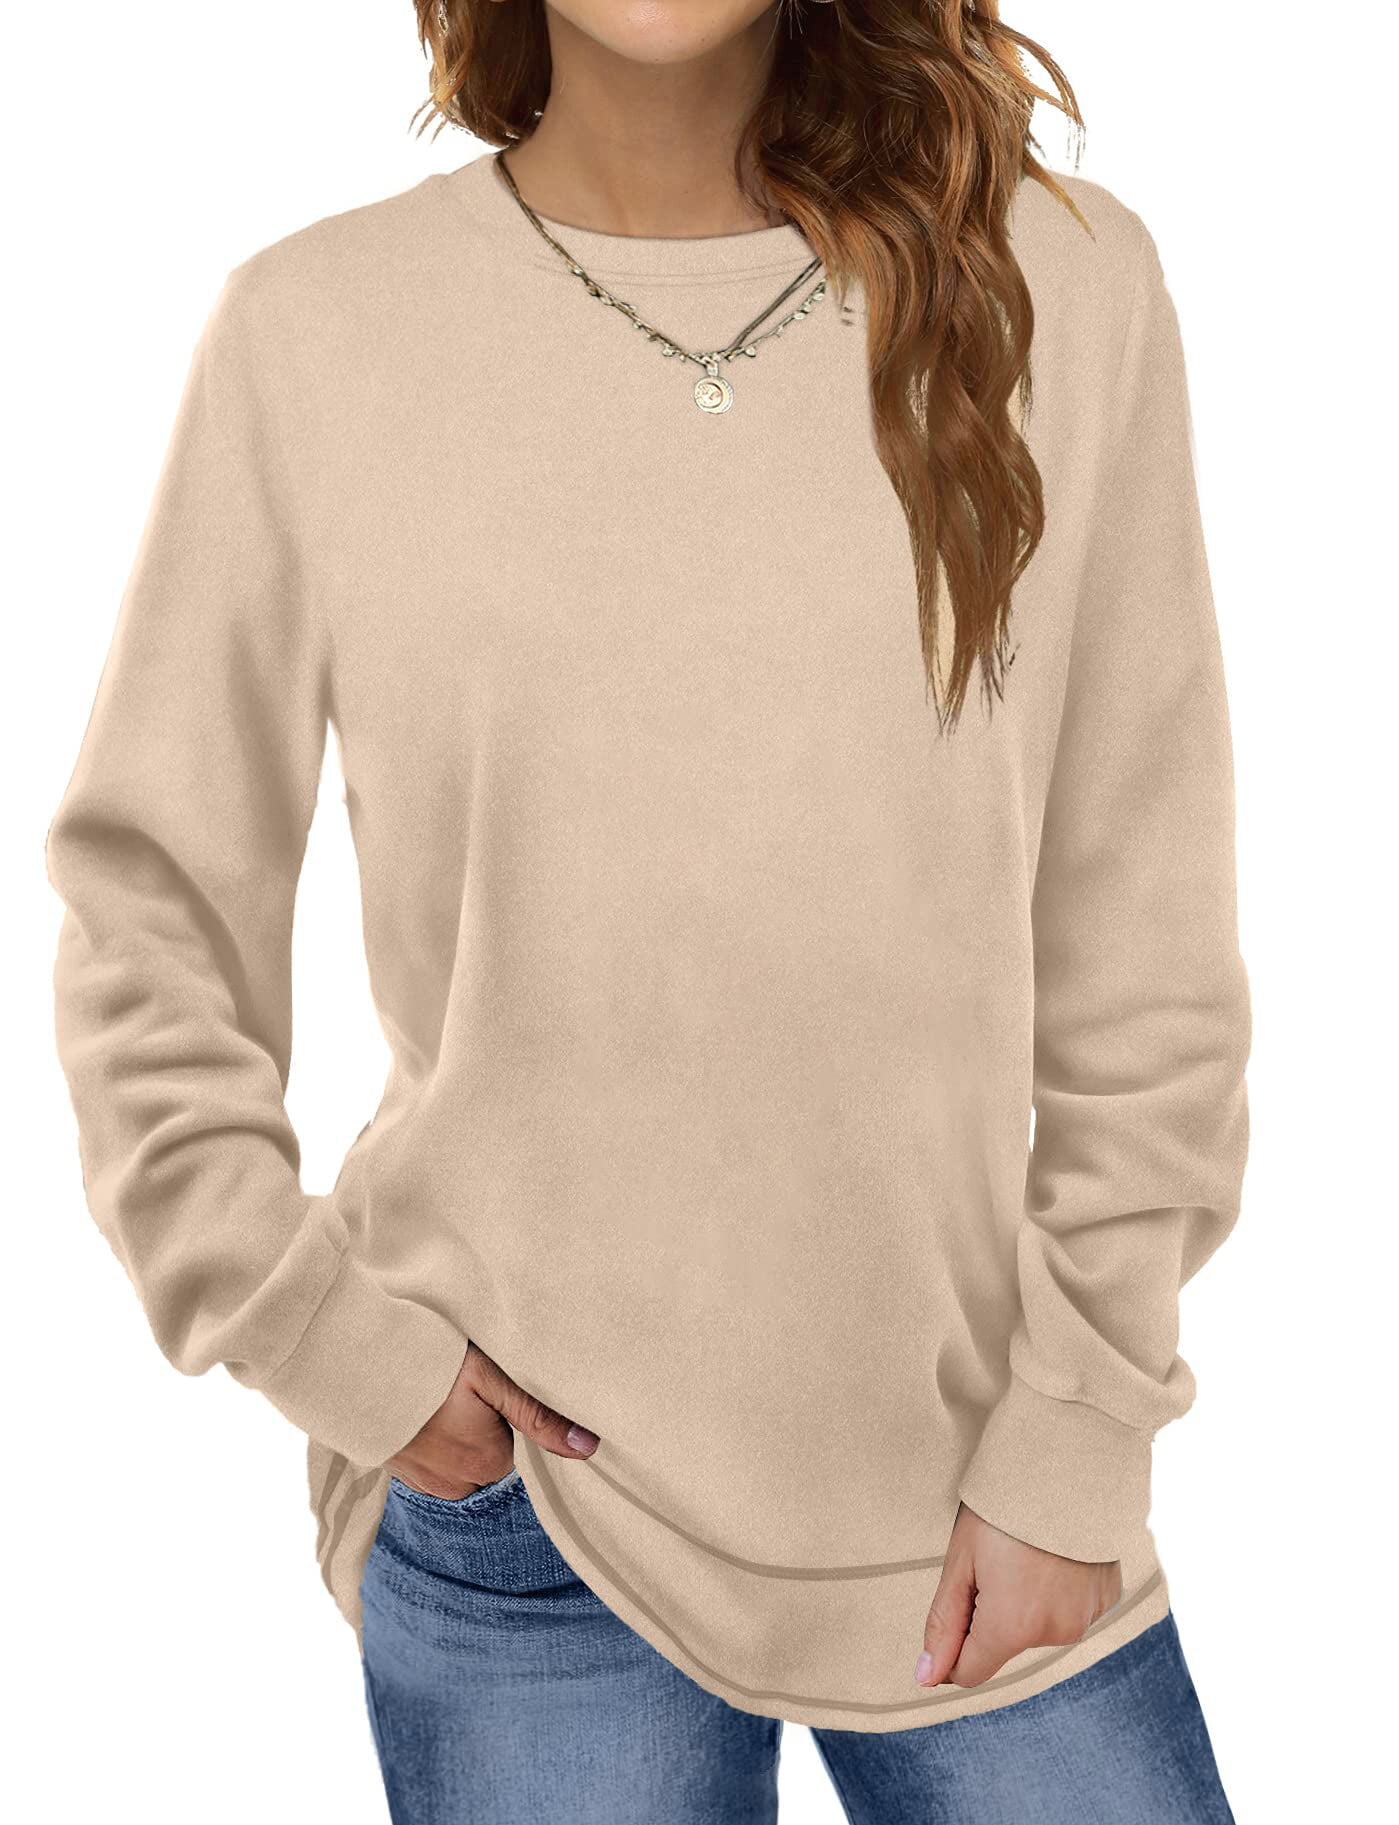 DBFBDTU Women Long Sleeve T Shirts Crew Neck Pima Cotton Tops Tees Beige S  at  Women's Clothing store